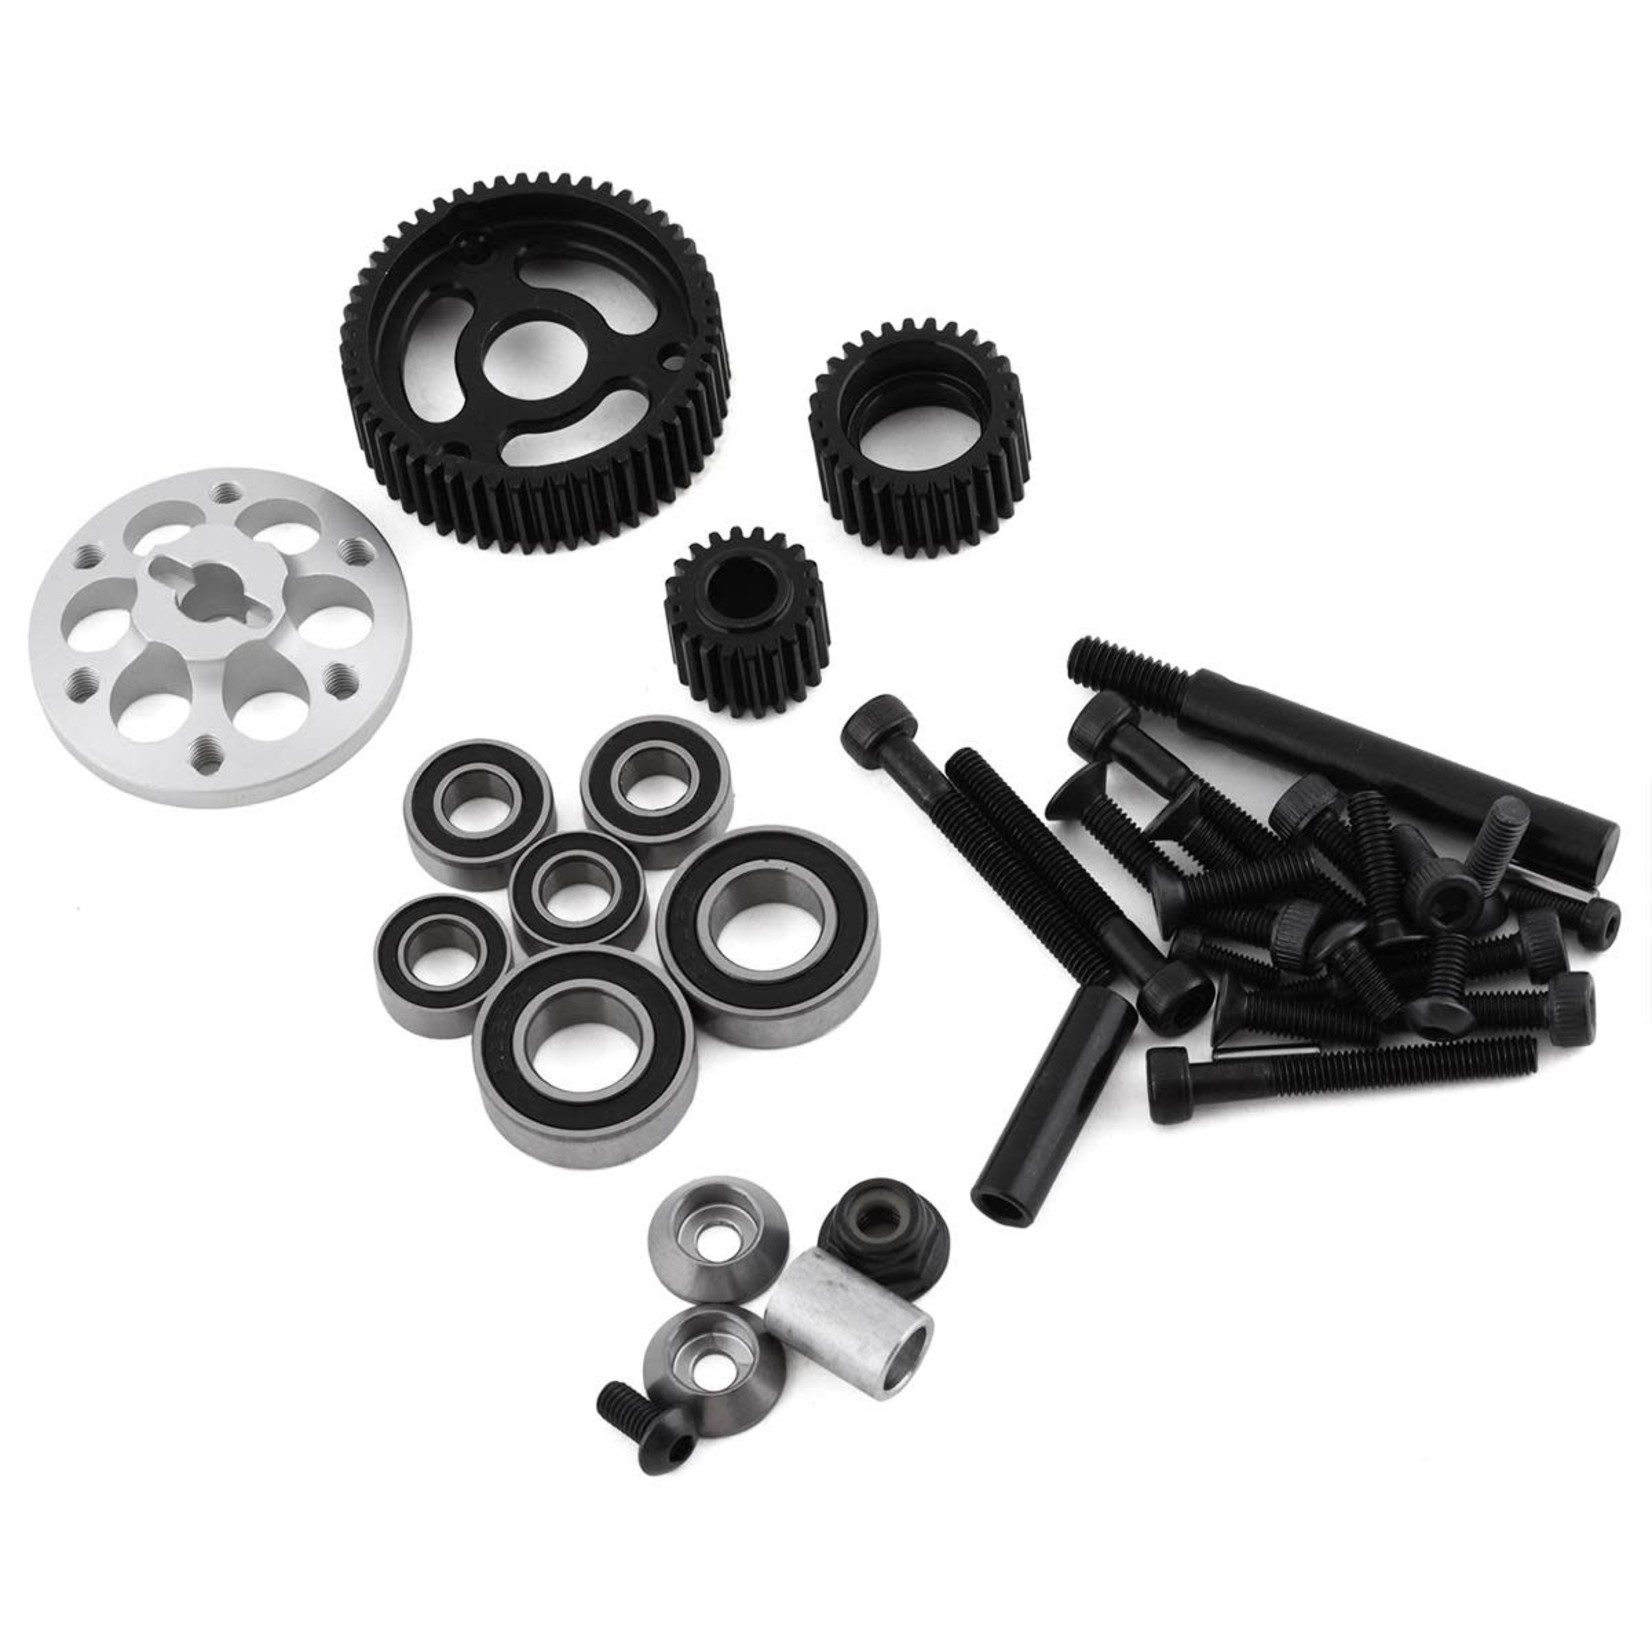 Vanquish Products Vanquish Products 3-Gear Transmission Kit (Grey) #VPS01203